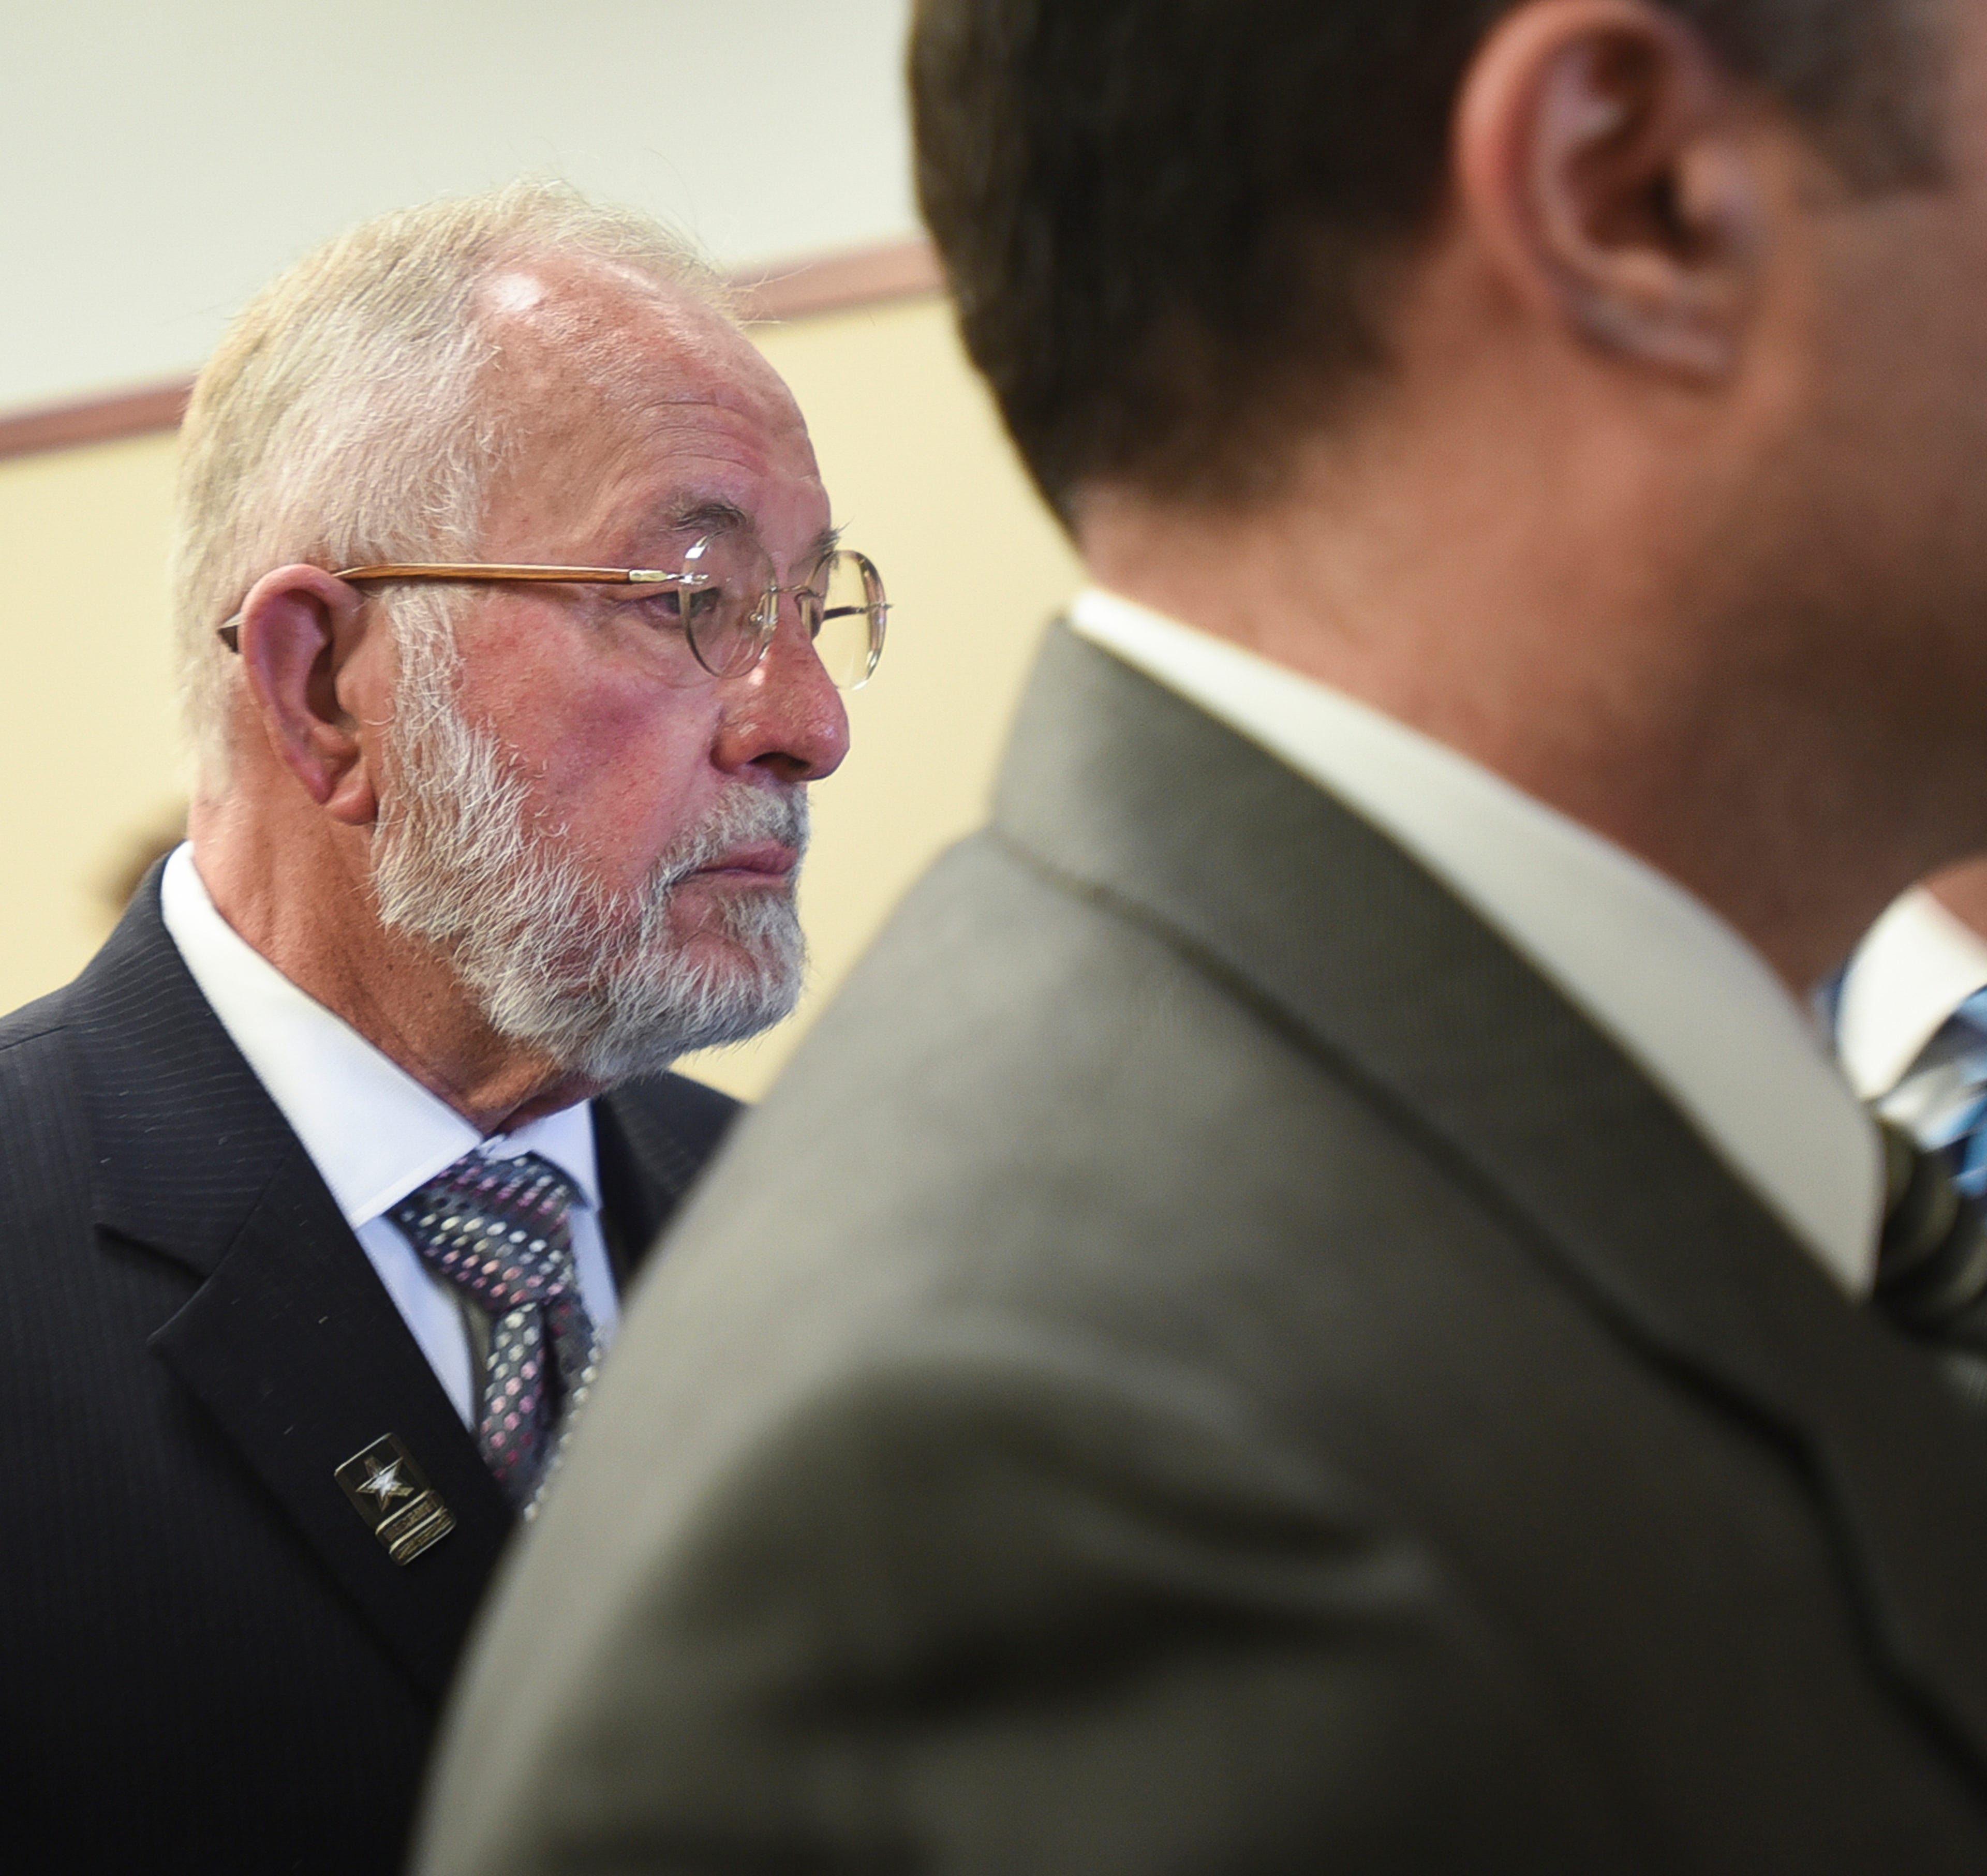 William Strampel, former dean at the College of Osteopathic Medicine at Michigan State University, leaves Ingham County Circuit Court after a jury found him guilty of misconduct in office and two charges of willful neglect of duty, Wednesday, June 12, 2019, at Veterans Memorial Courthouse in Lansing, Mich.  Strampel, 71, had been accused of abusing his power to sexually proposition and harass female students and not enforcing patient restrictions imposed on Larry Nassar following a 2014 complaint. Jurors found him not guilty of felony criminal sexual conduct in the second degree, a charge that could have sent him to prison for up to 15 years for grabbing the buttocks of at least one student.